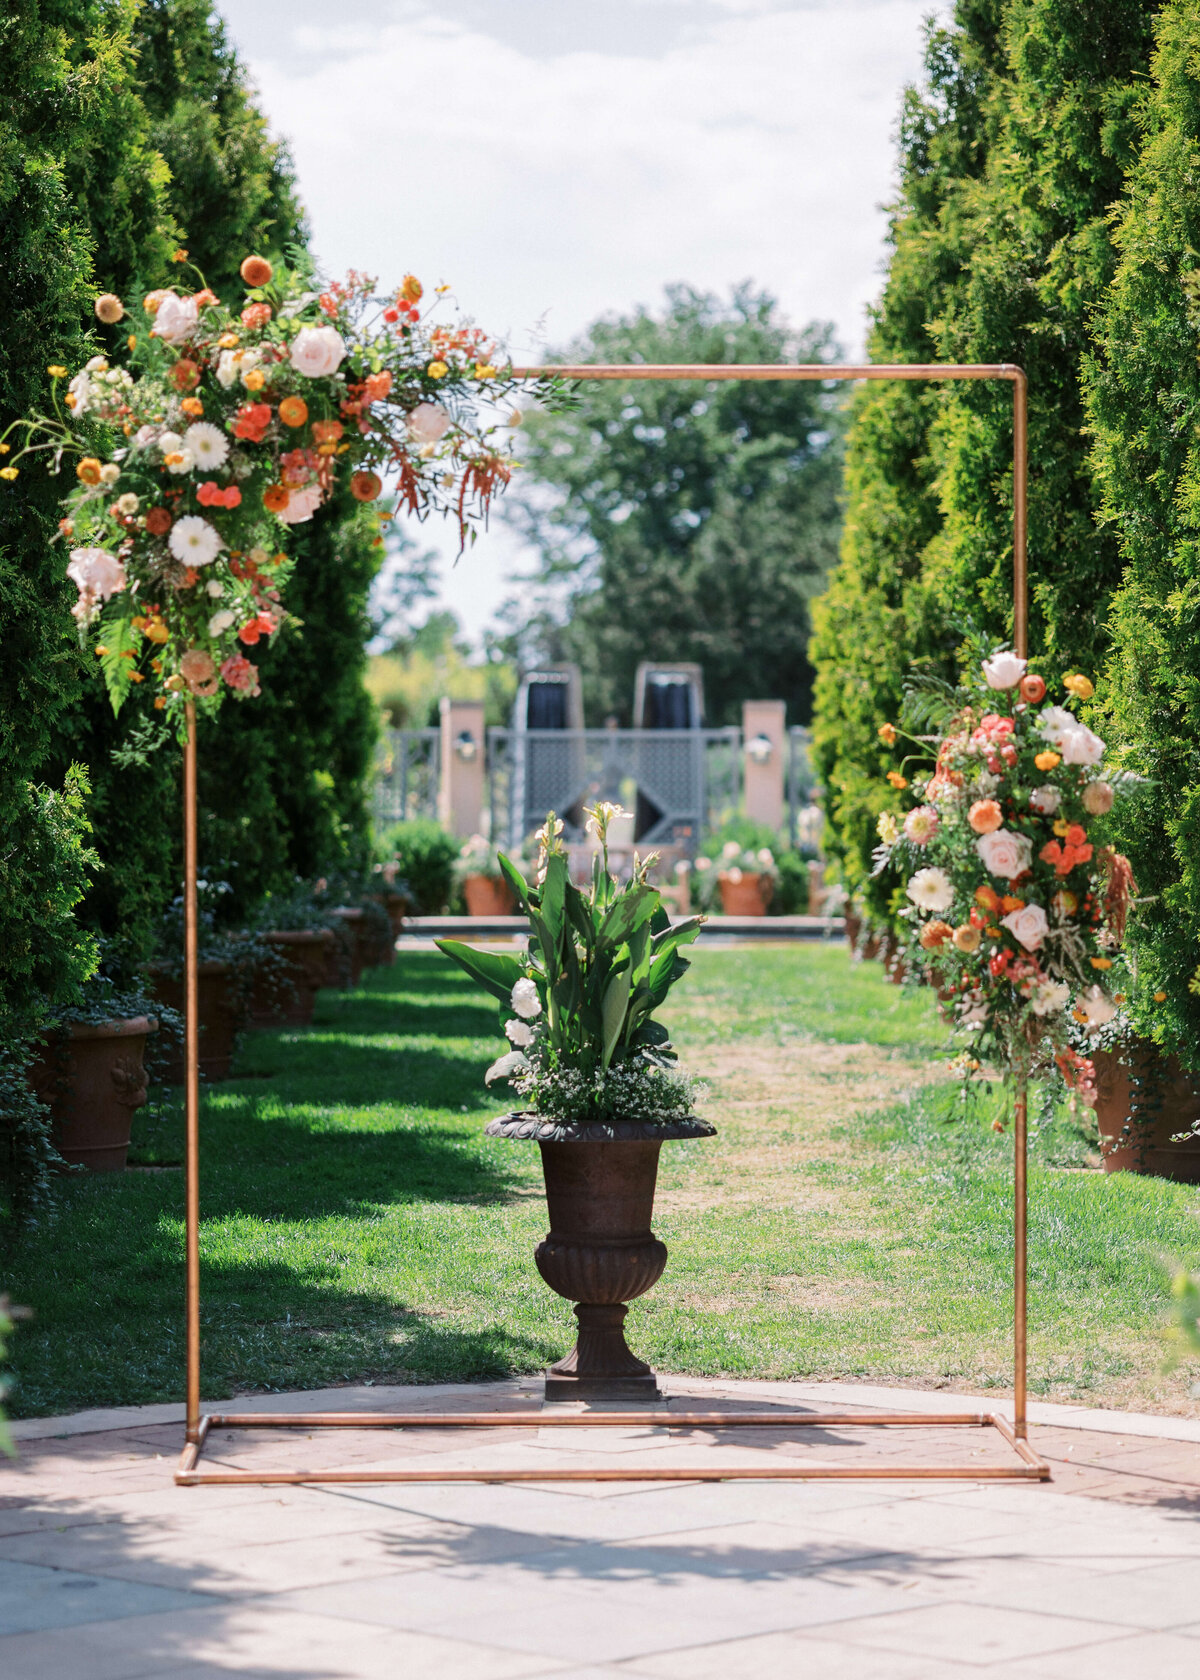 Copper Archway is adorned with floral arrangements at garden wedding ceremony site